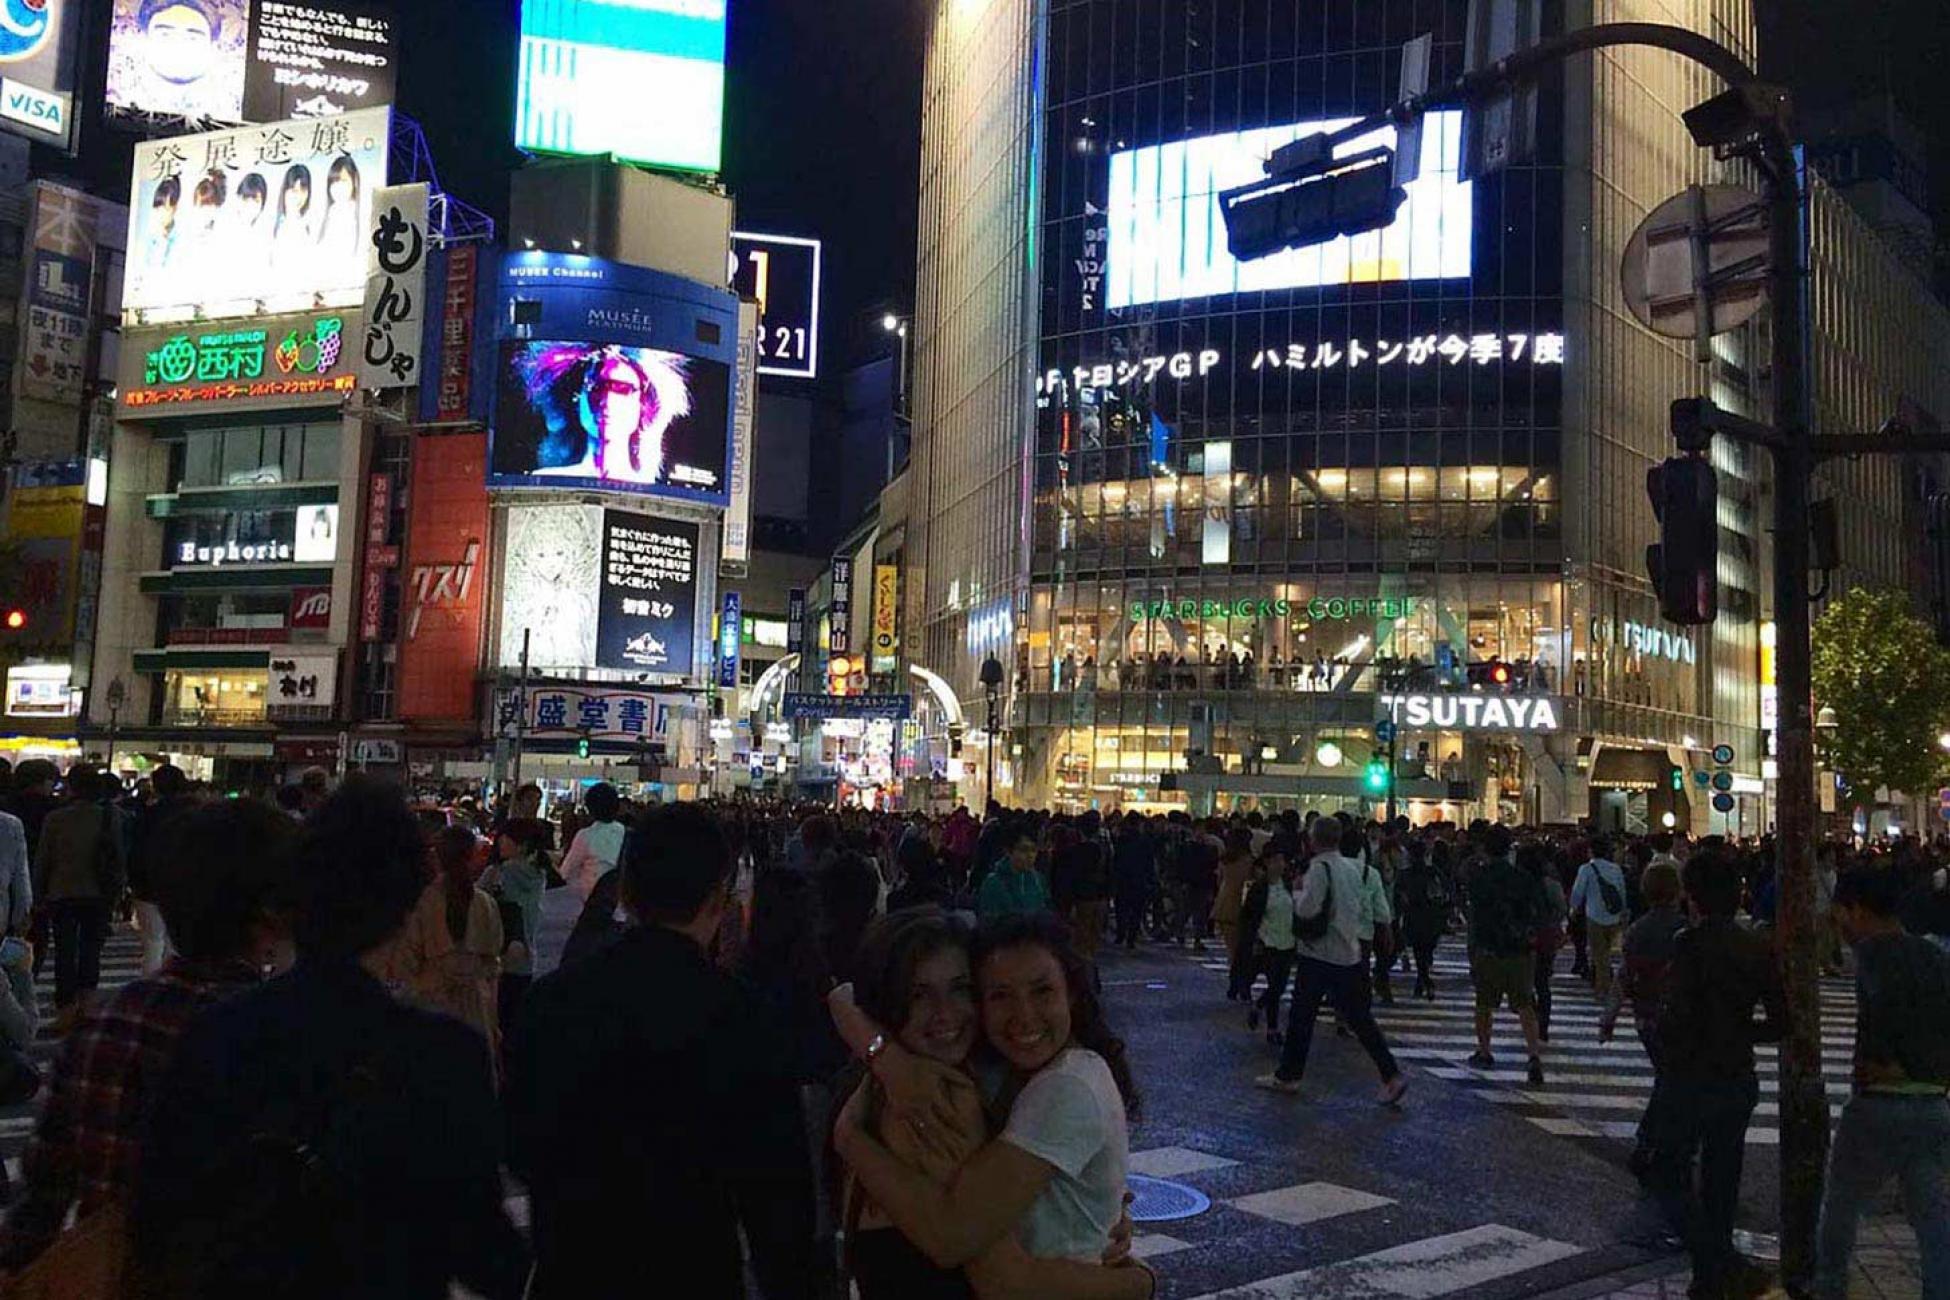 Gillian celebrates a safe arrival with her friend in Shibuya, Tokyo.